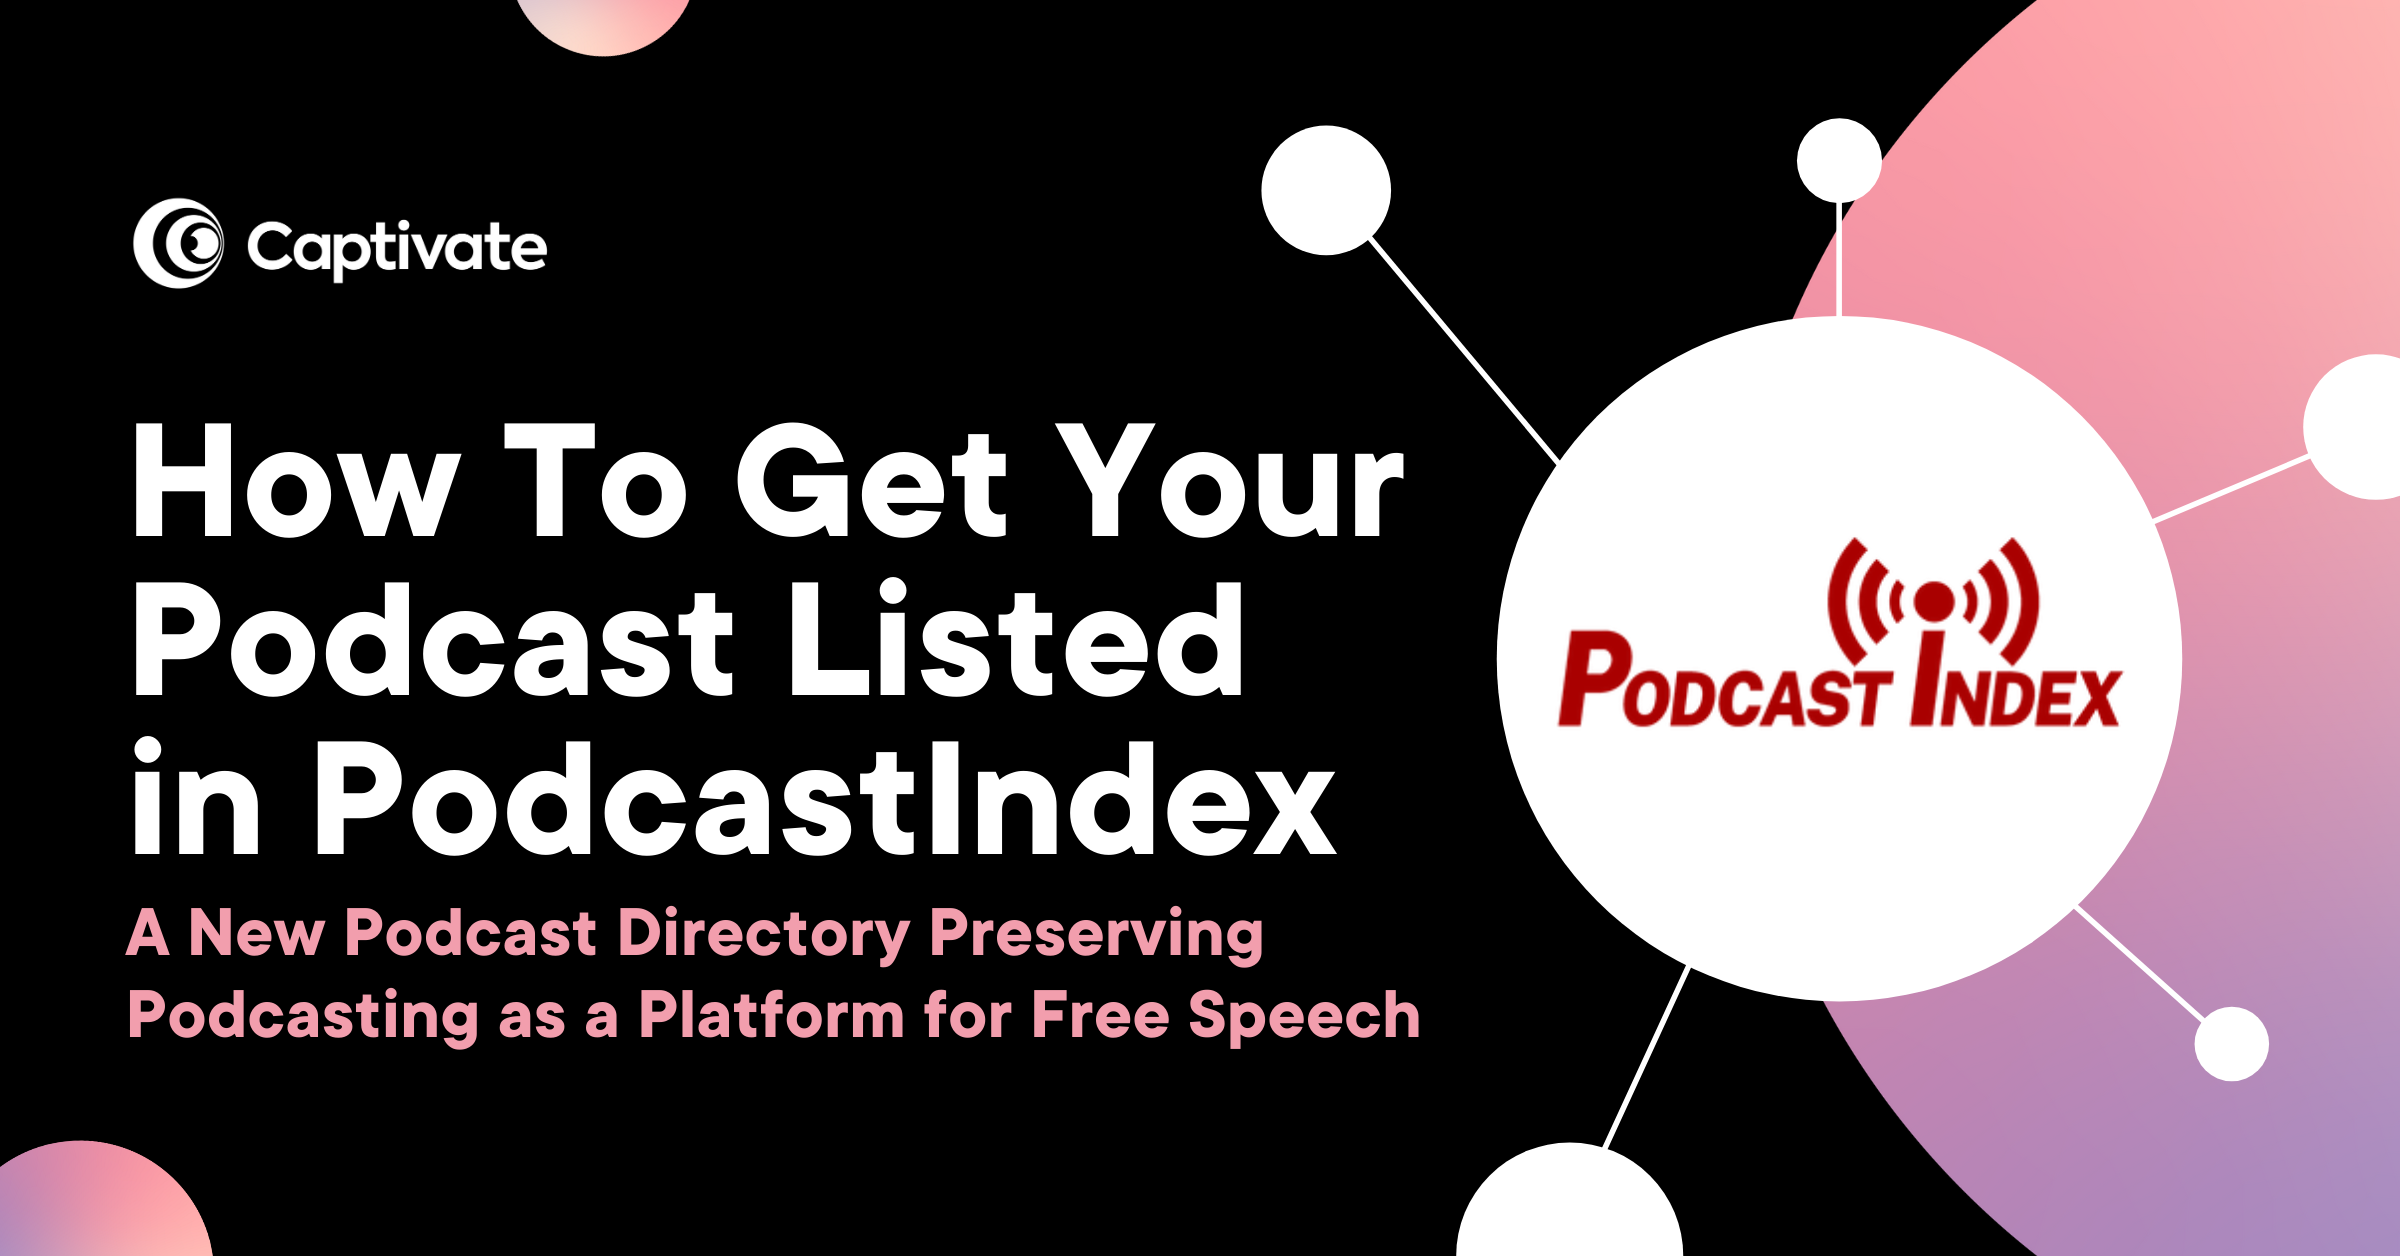 Captivate Blog Post Image: How to get your podcast listed in PodcastIndex